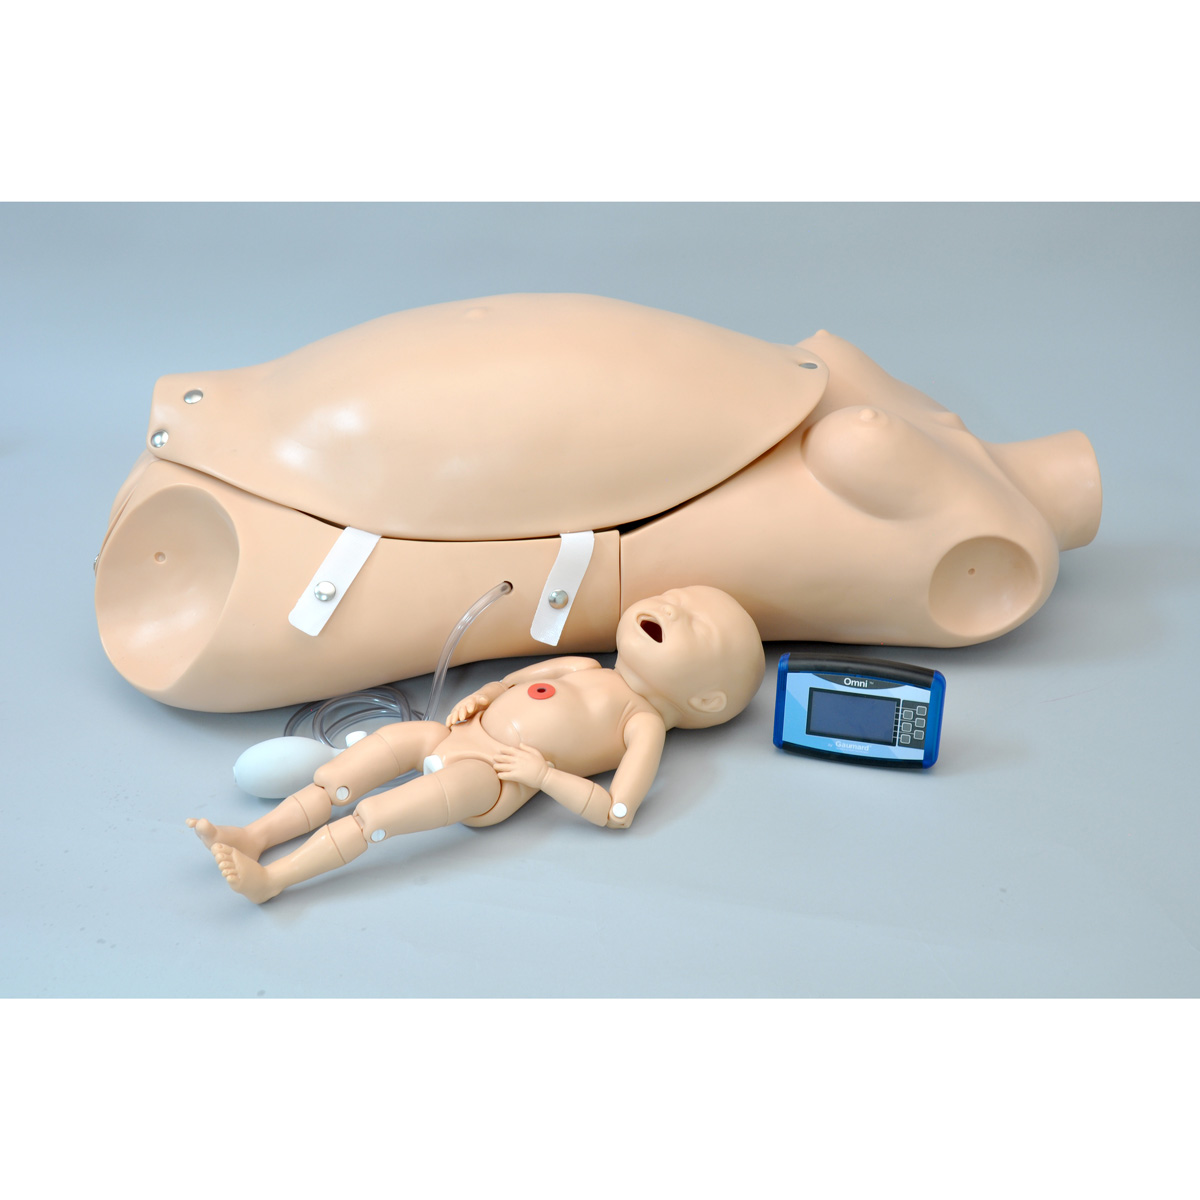 Labor Delivery Module for use with birthing simulator W45025 - 1005824 -  W45151 - Gaumard - S500.4.M - Options - 3B Scientific